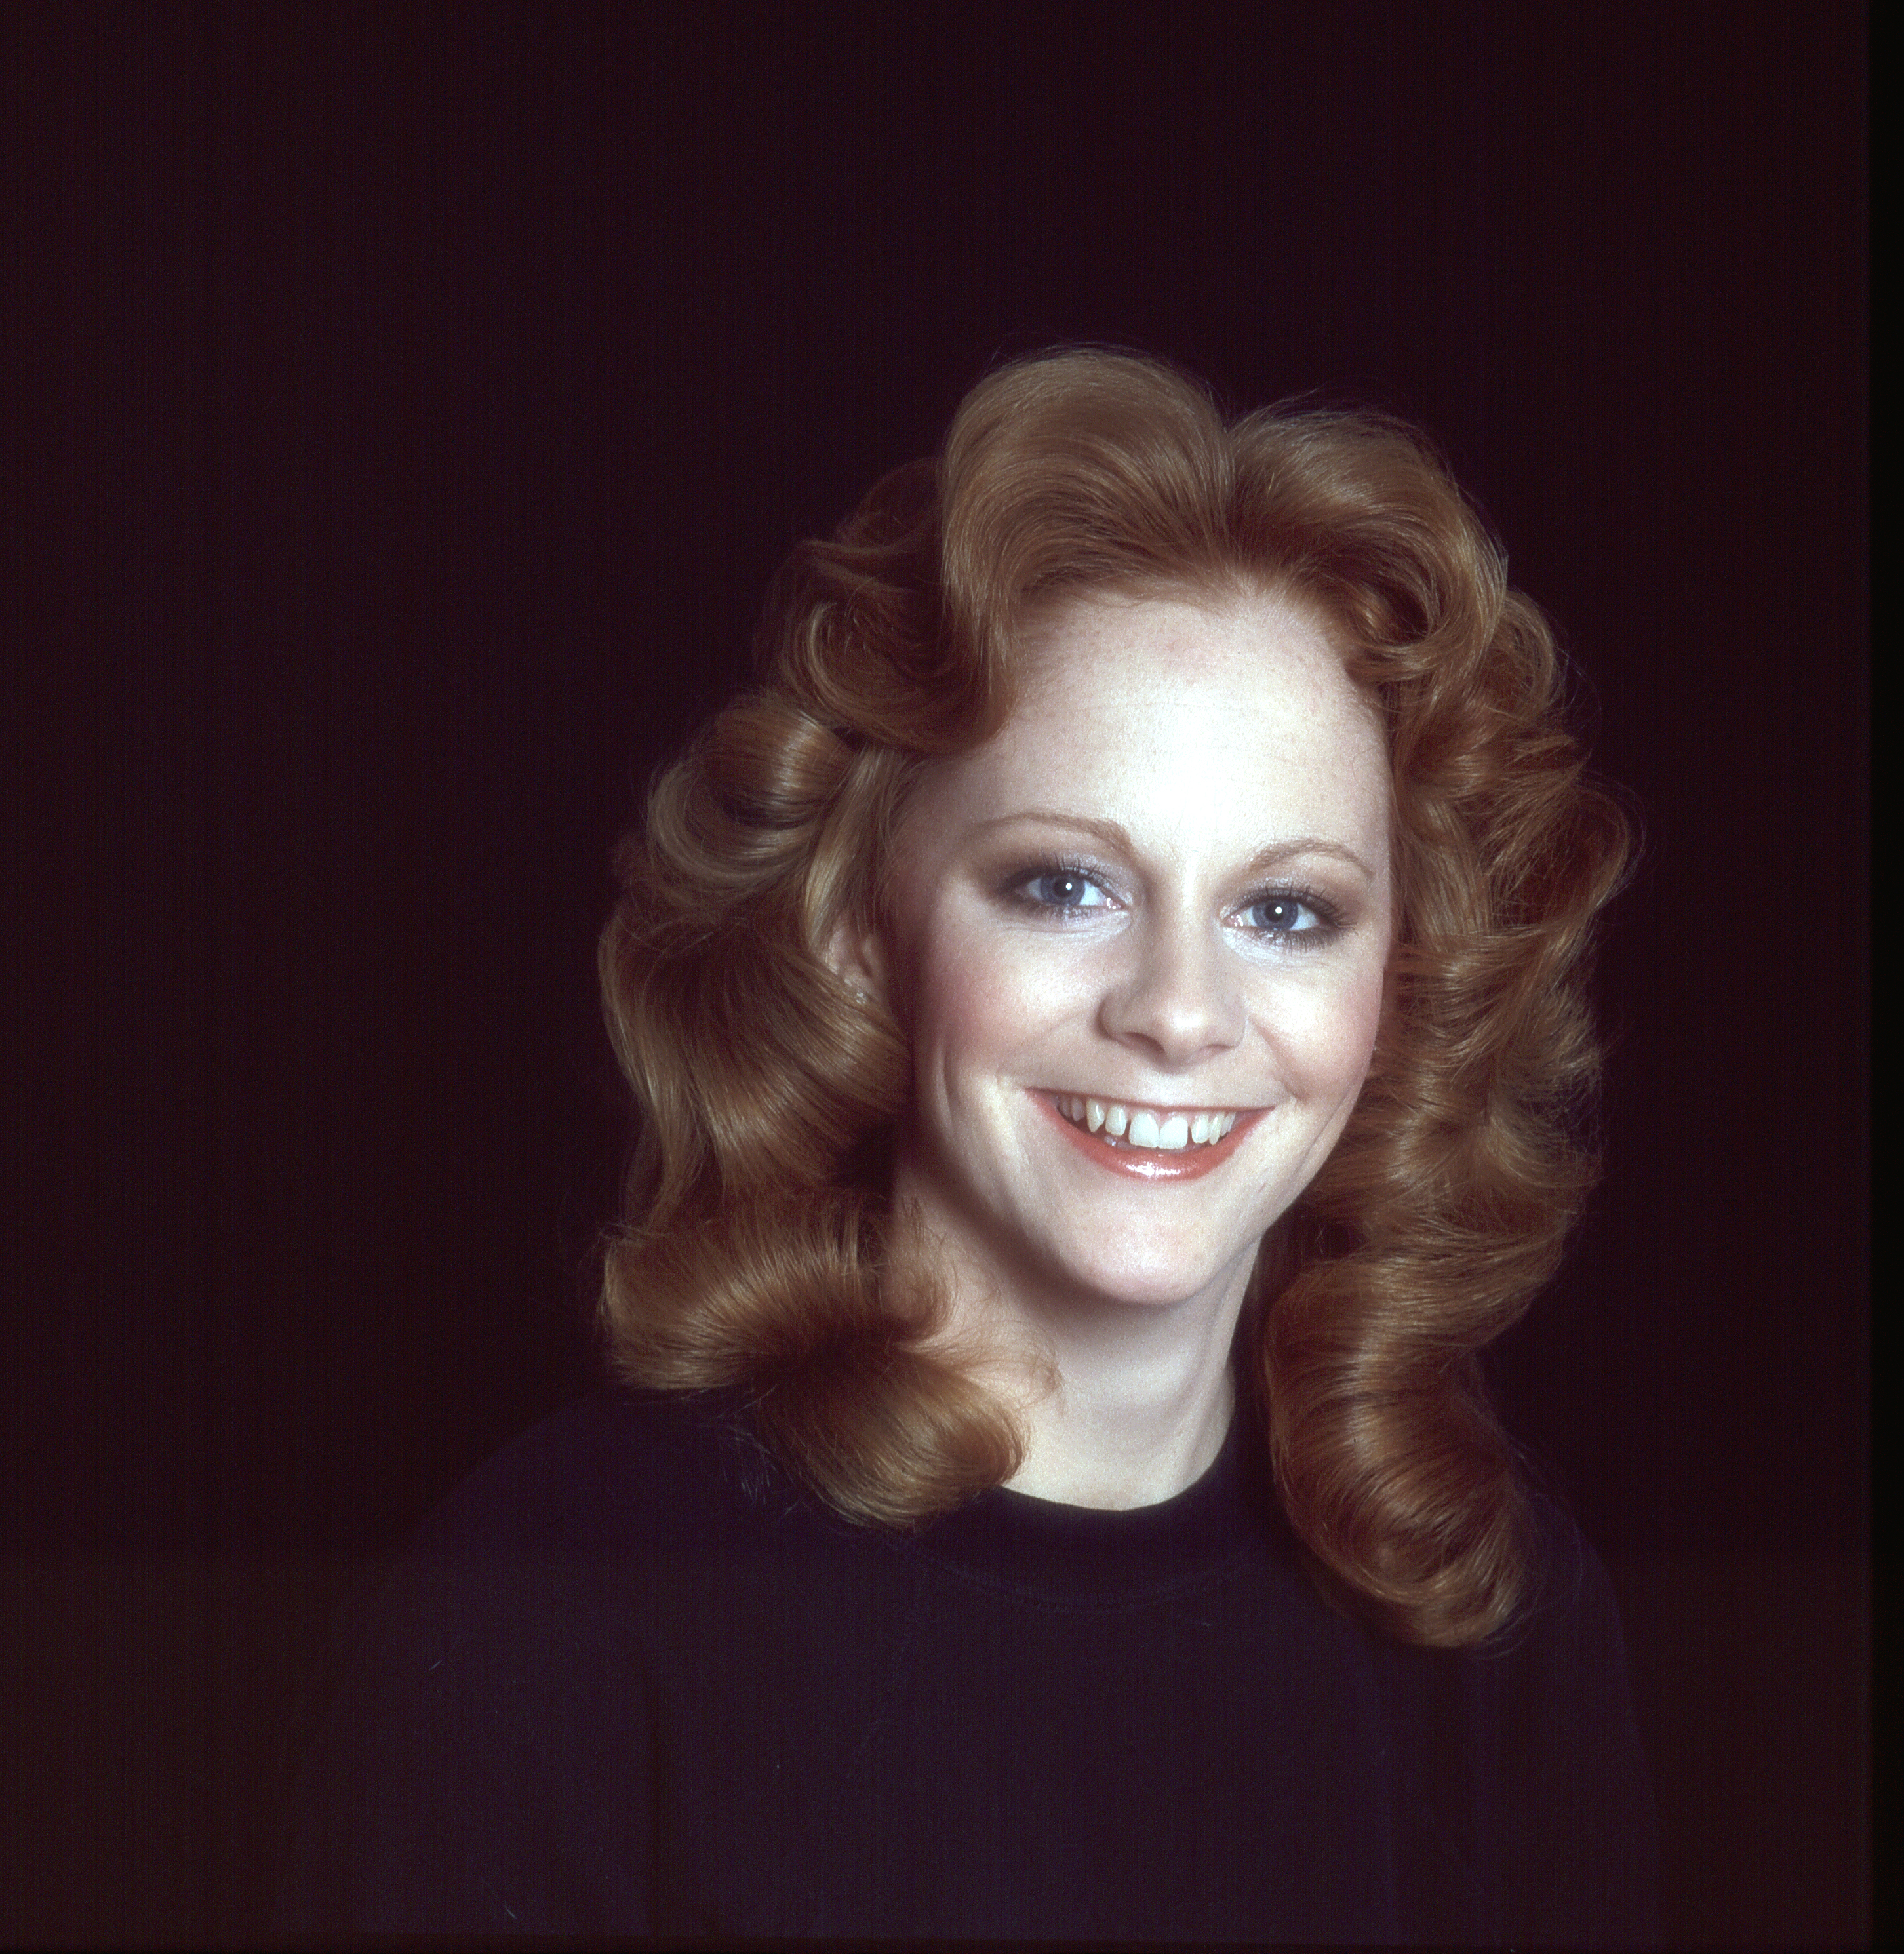 Reba McEntire photographed on January 1, 1960 | Source: Getty Images